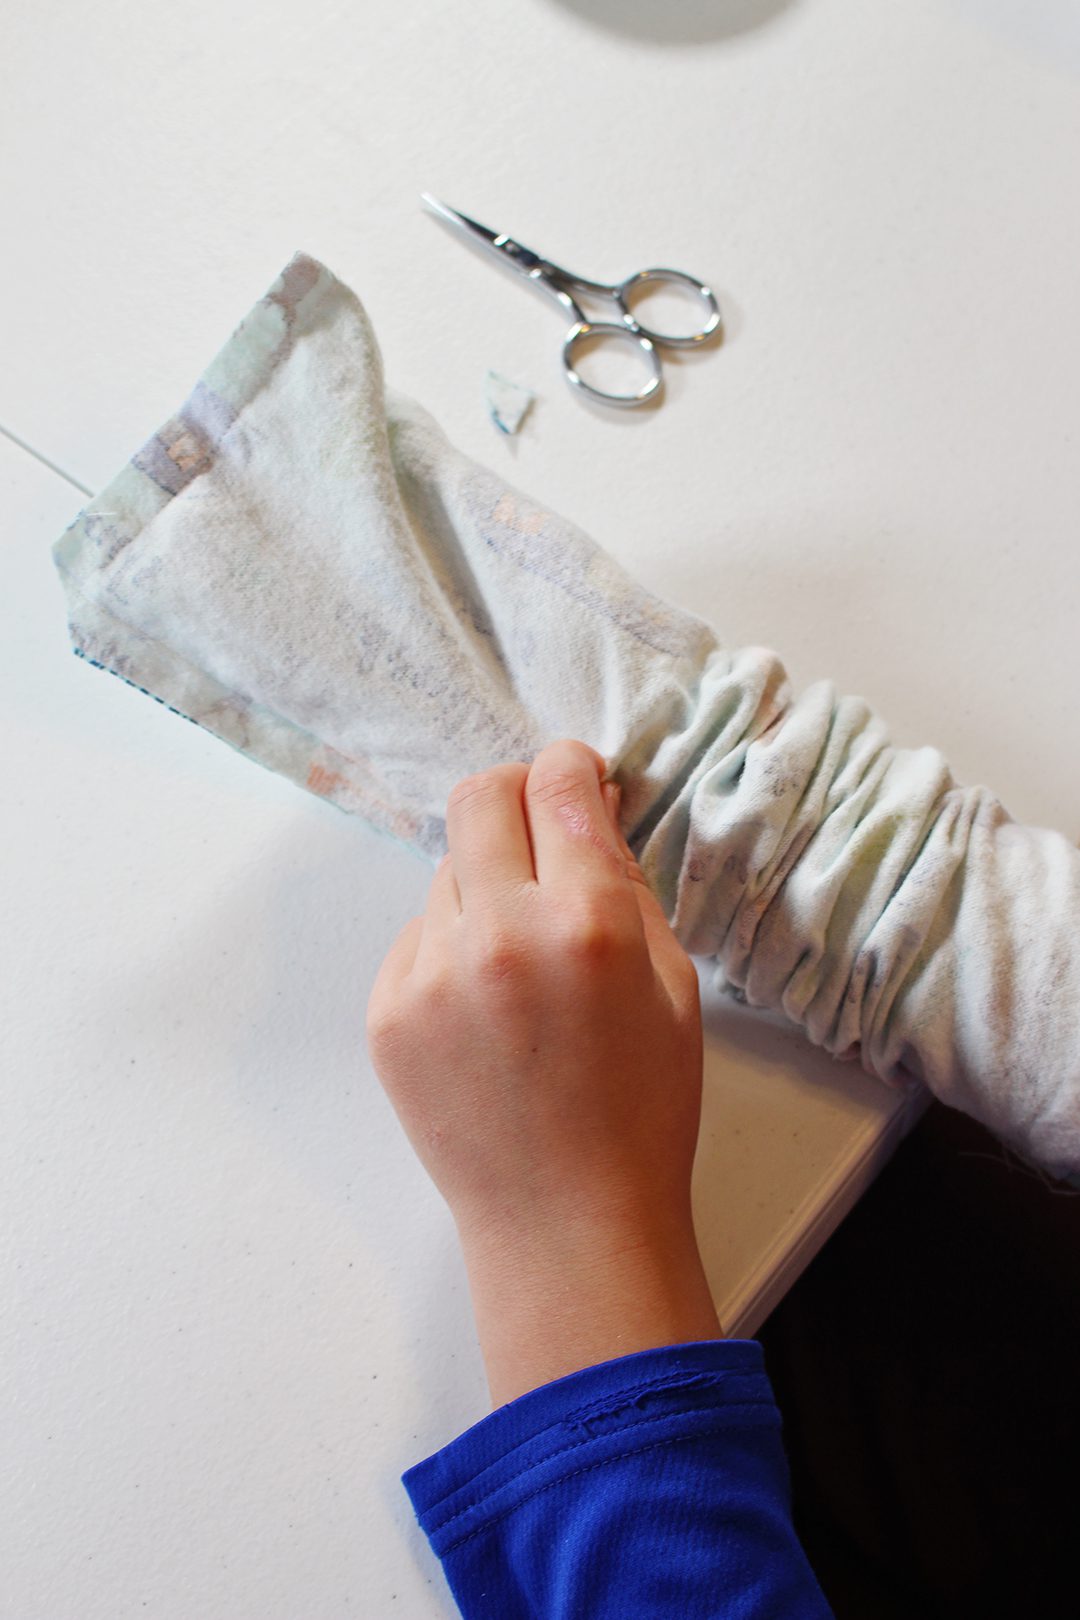 A child turning a sewed bag inside out.